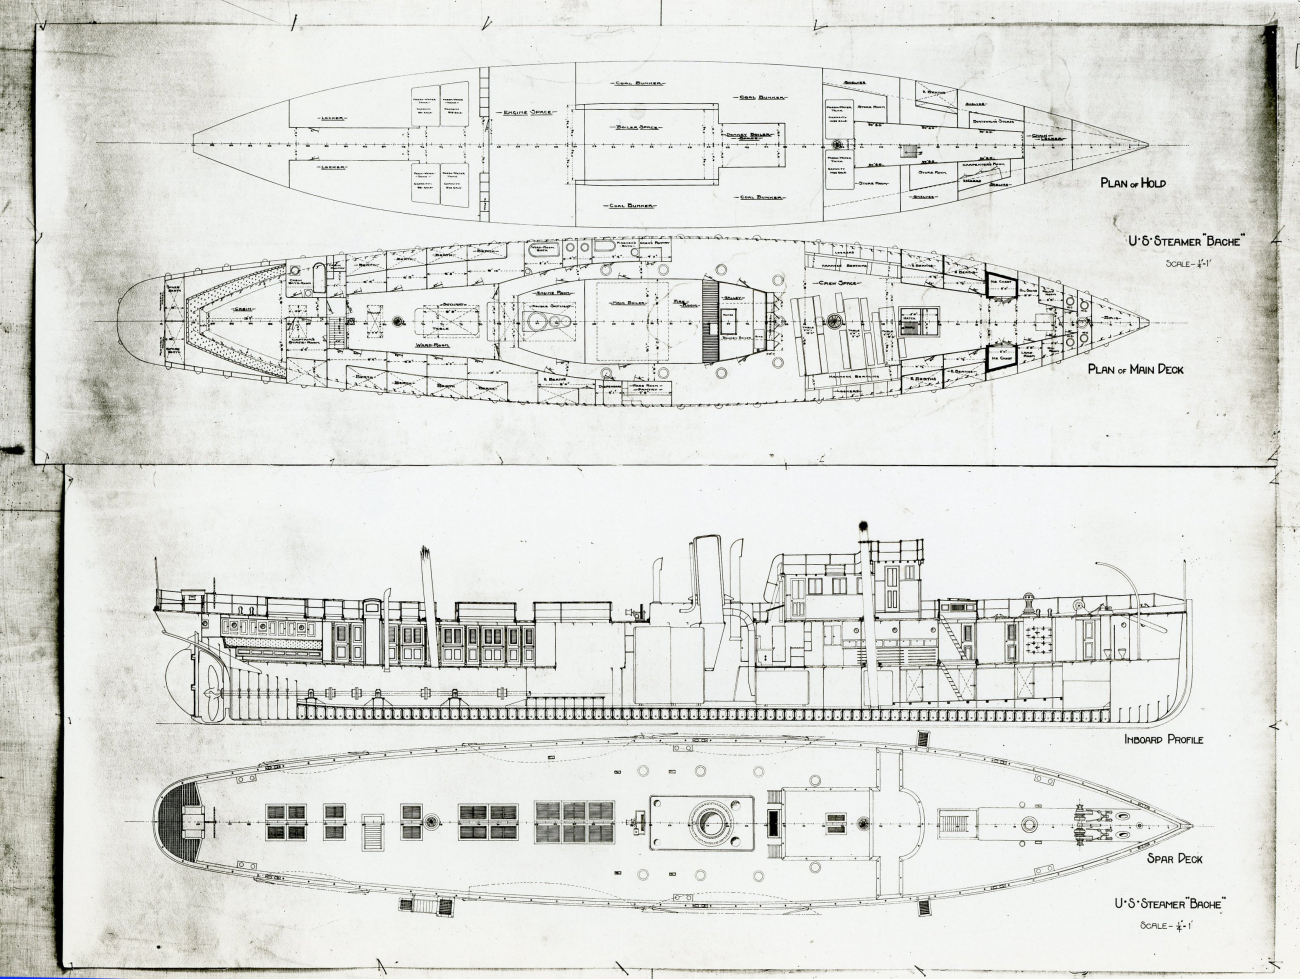 Line drawing and plans of the second C&GS; Ship BACHE